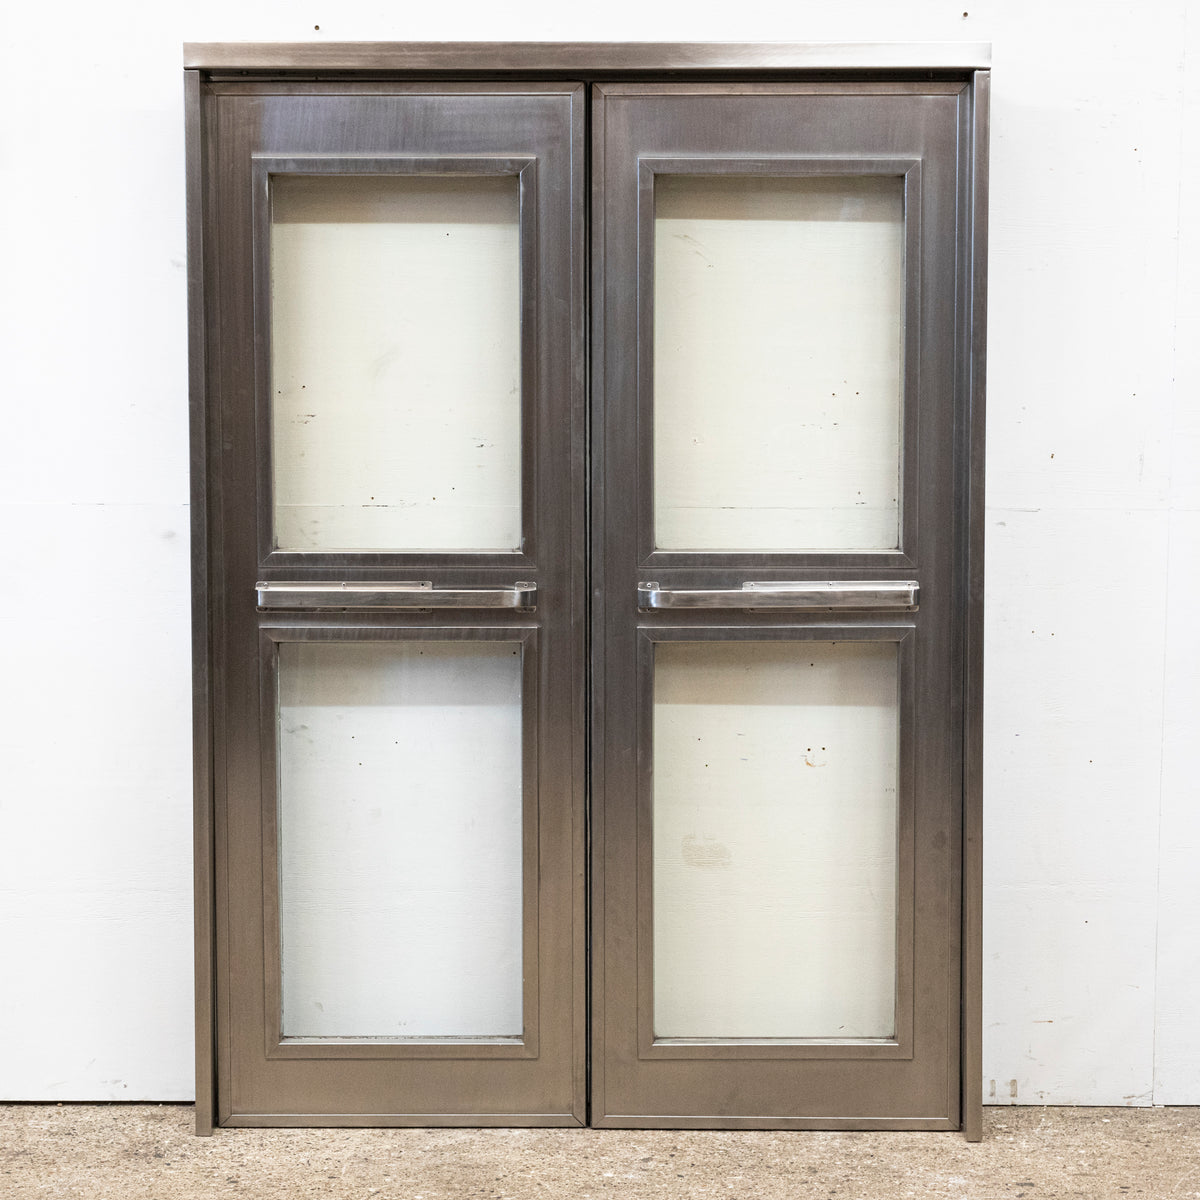 Pair Of Reclaimed Mid-Century Chrome Double Doors | The Architectural Forum